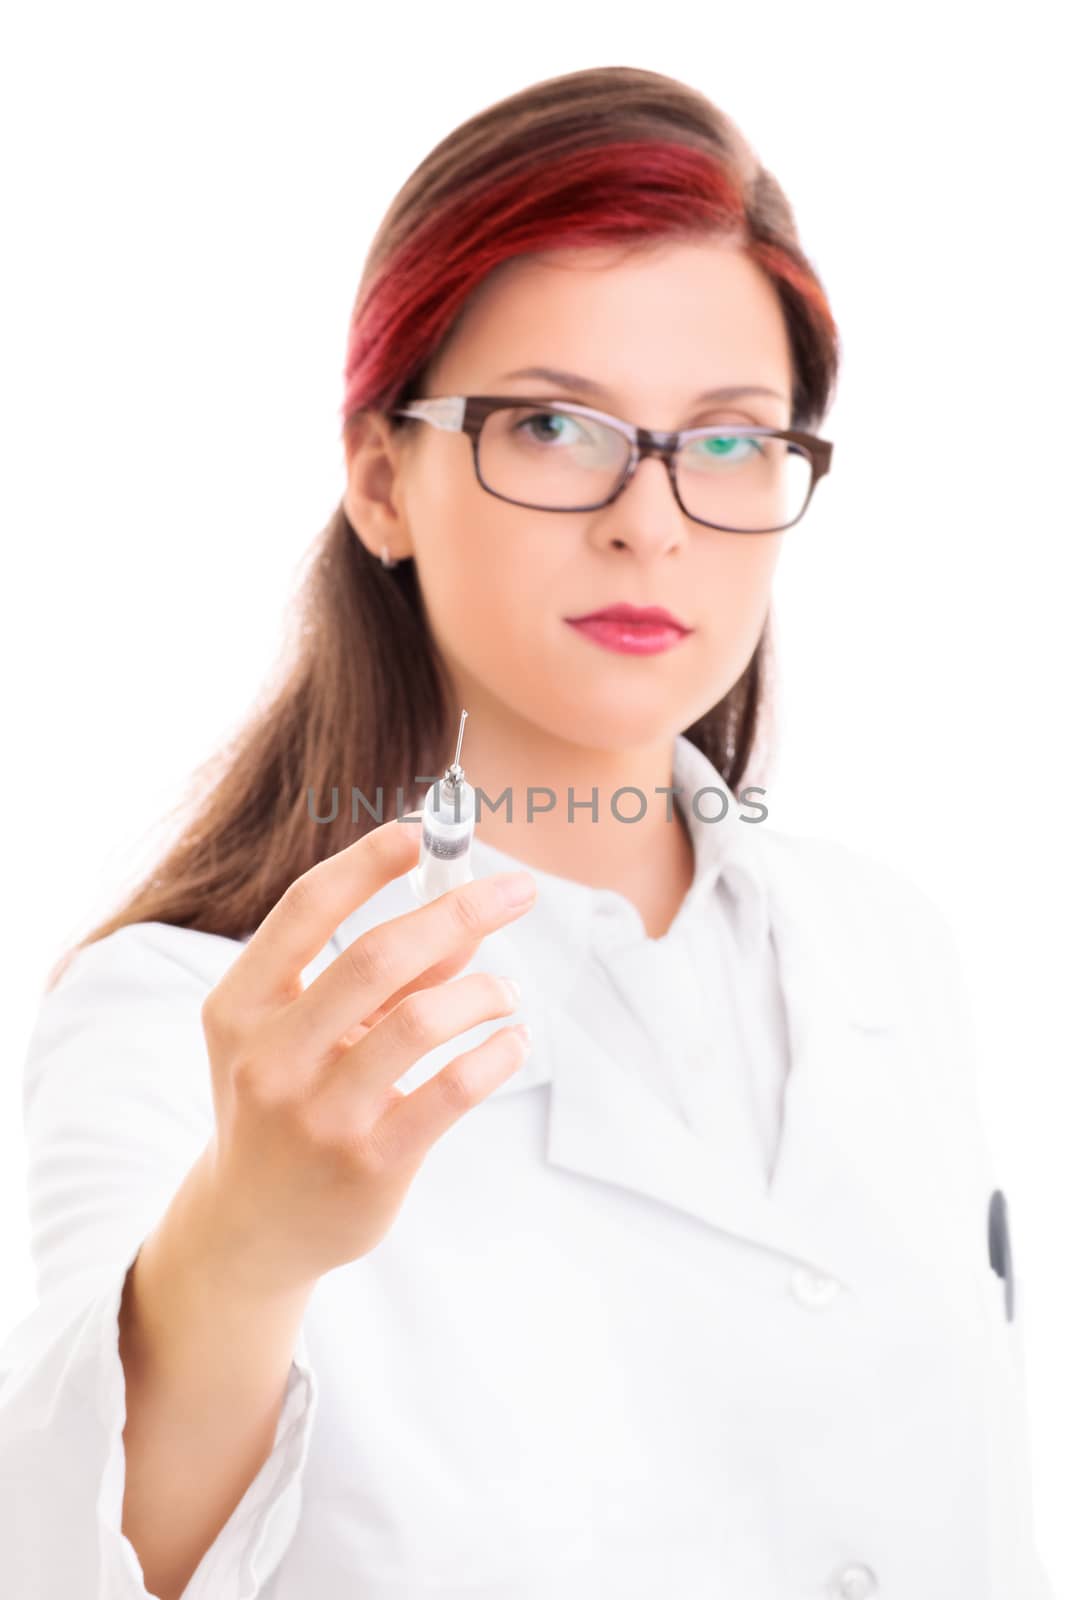 Close up of a young serious female doctor with glasses holding a syringe with needle, isolated on white background. Health care concept.